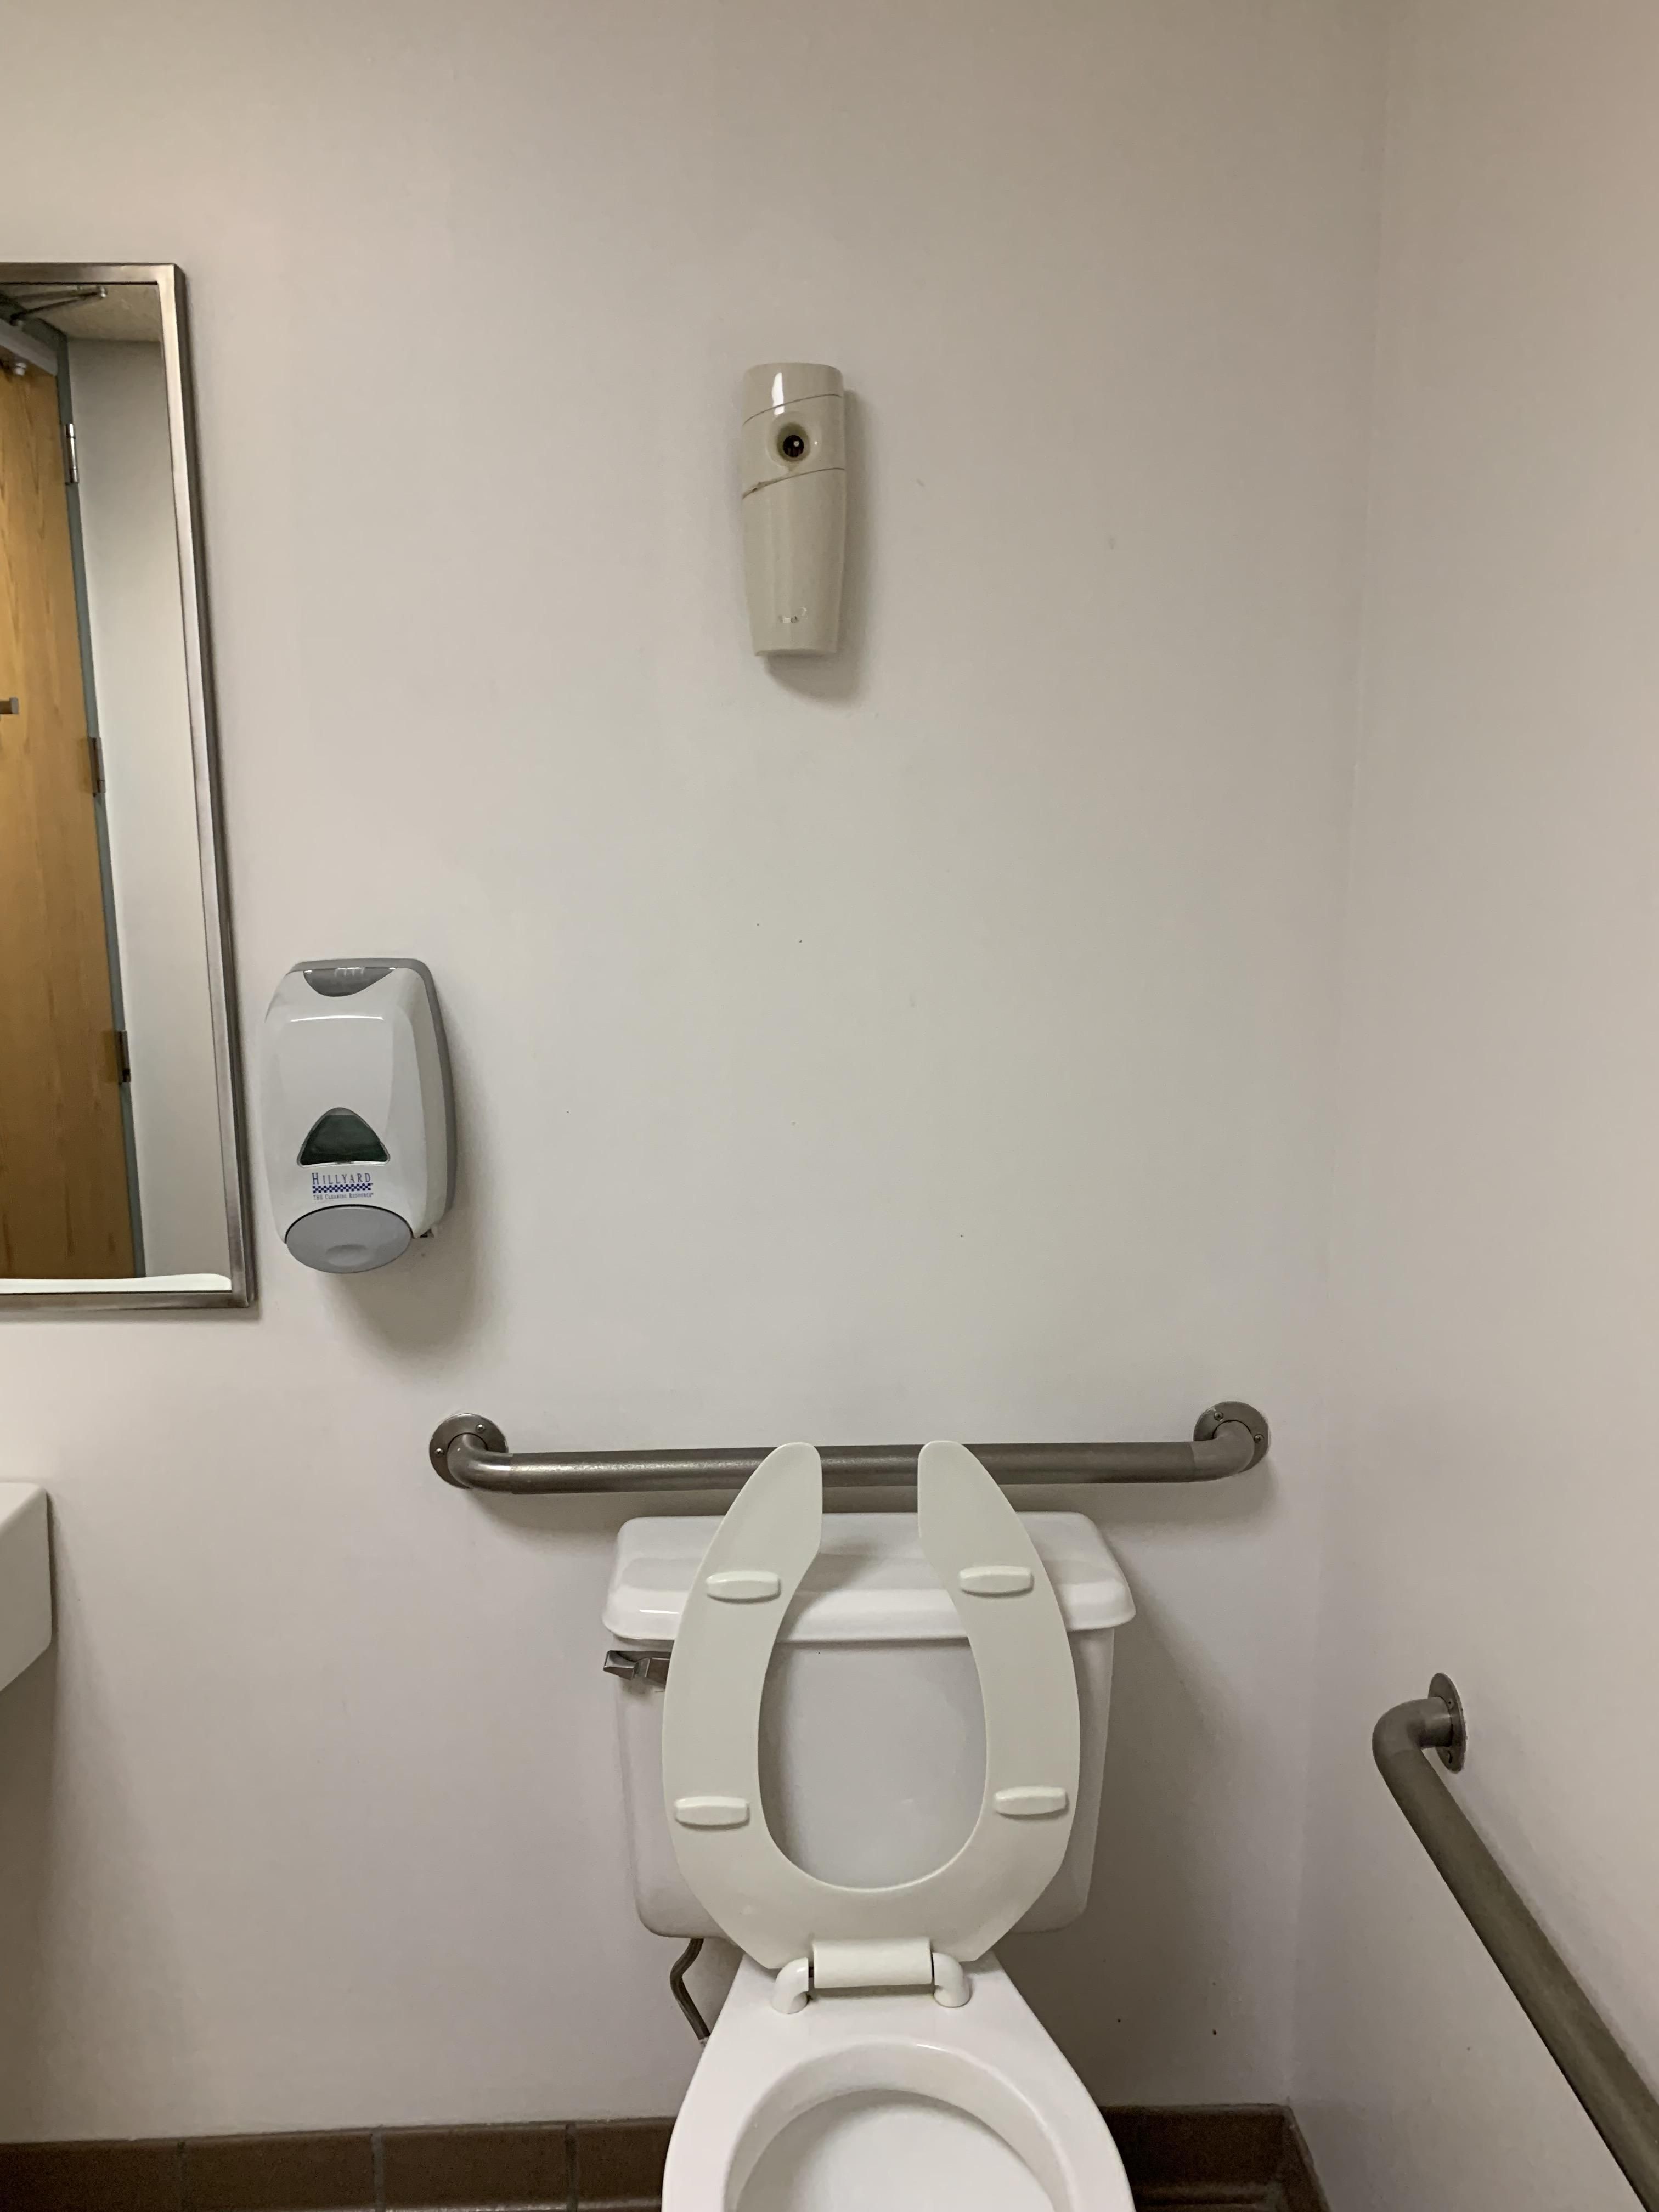 My doctors office has a timed air freshener that sprays directly in your face as you pee.